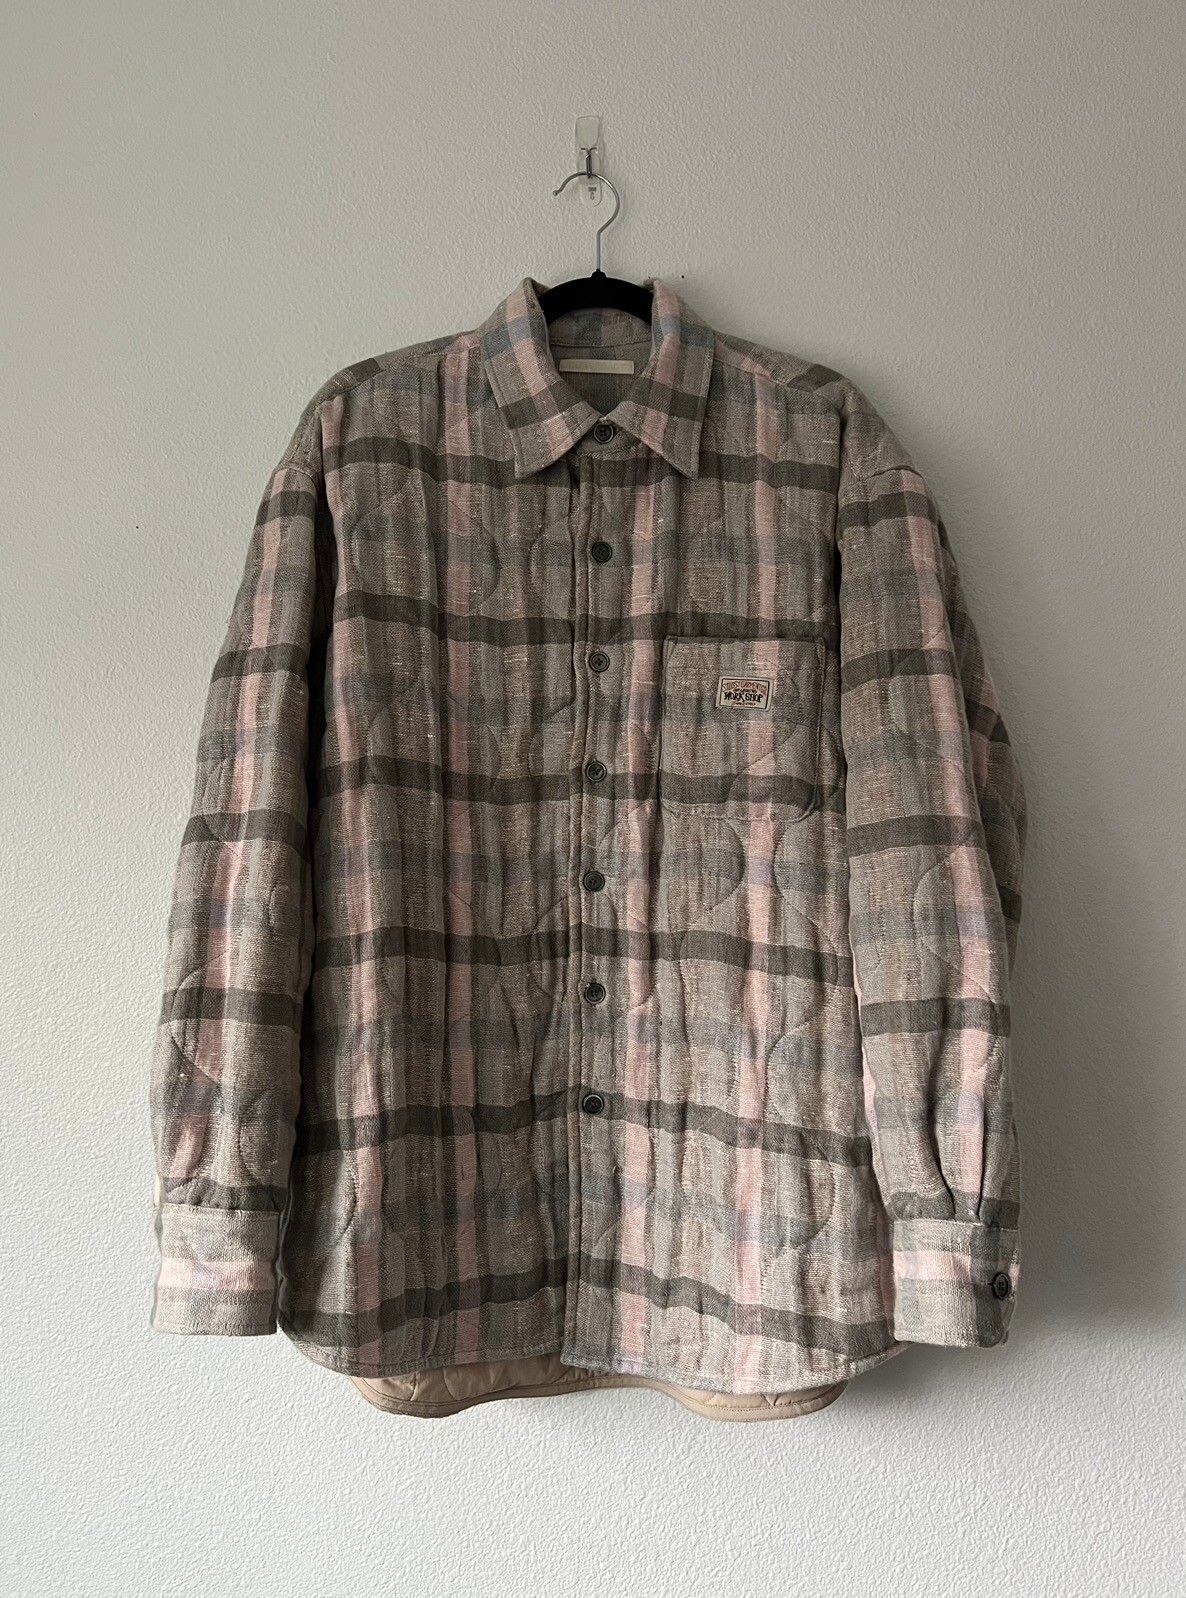 Our Legacy Borrowed Jacket Pale Linen Check Beige Pink Size US S / EU 44-46 / 1 - 2 Preview